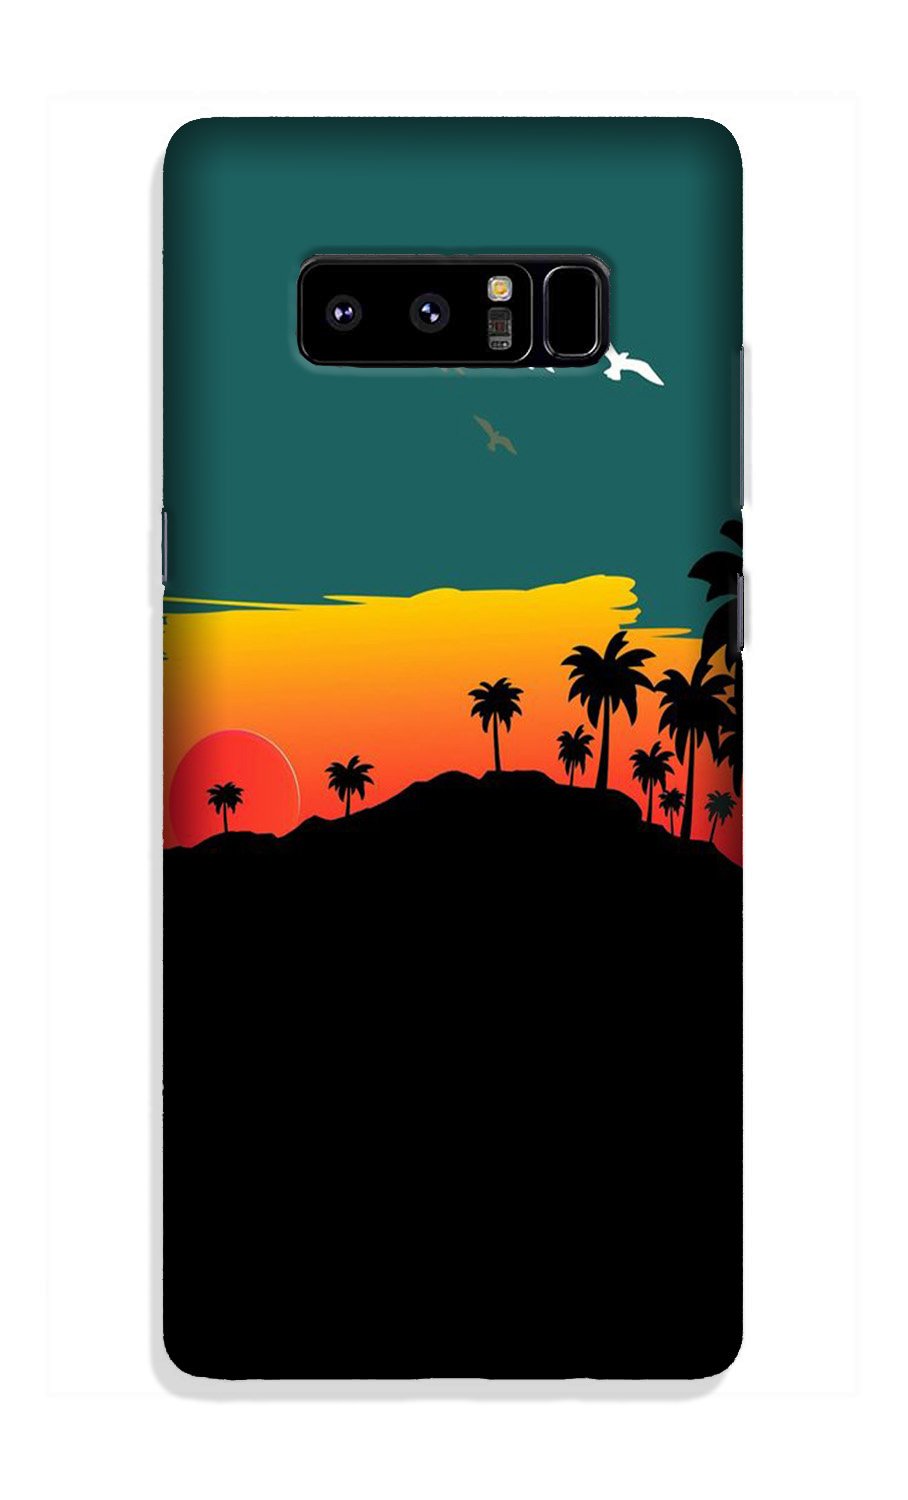 Sky Trees Case for Galaxy Note 8 (Design - 191)